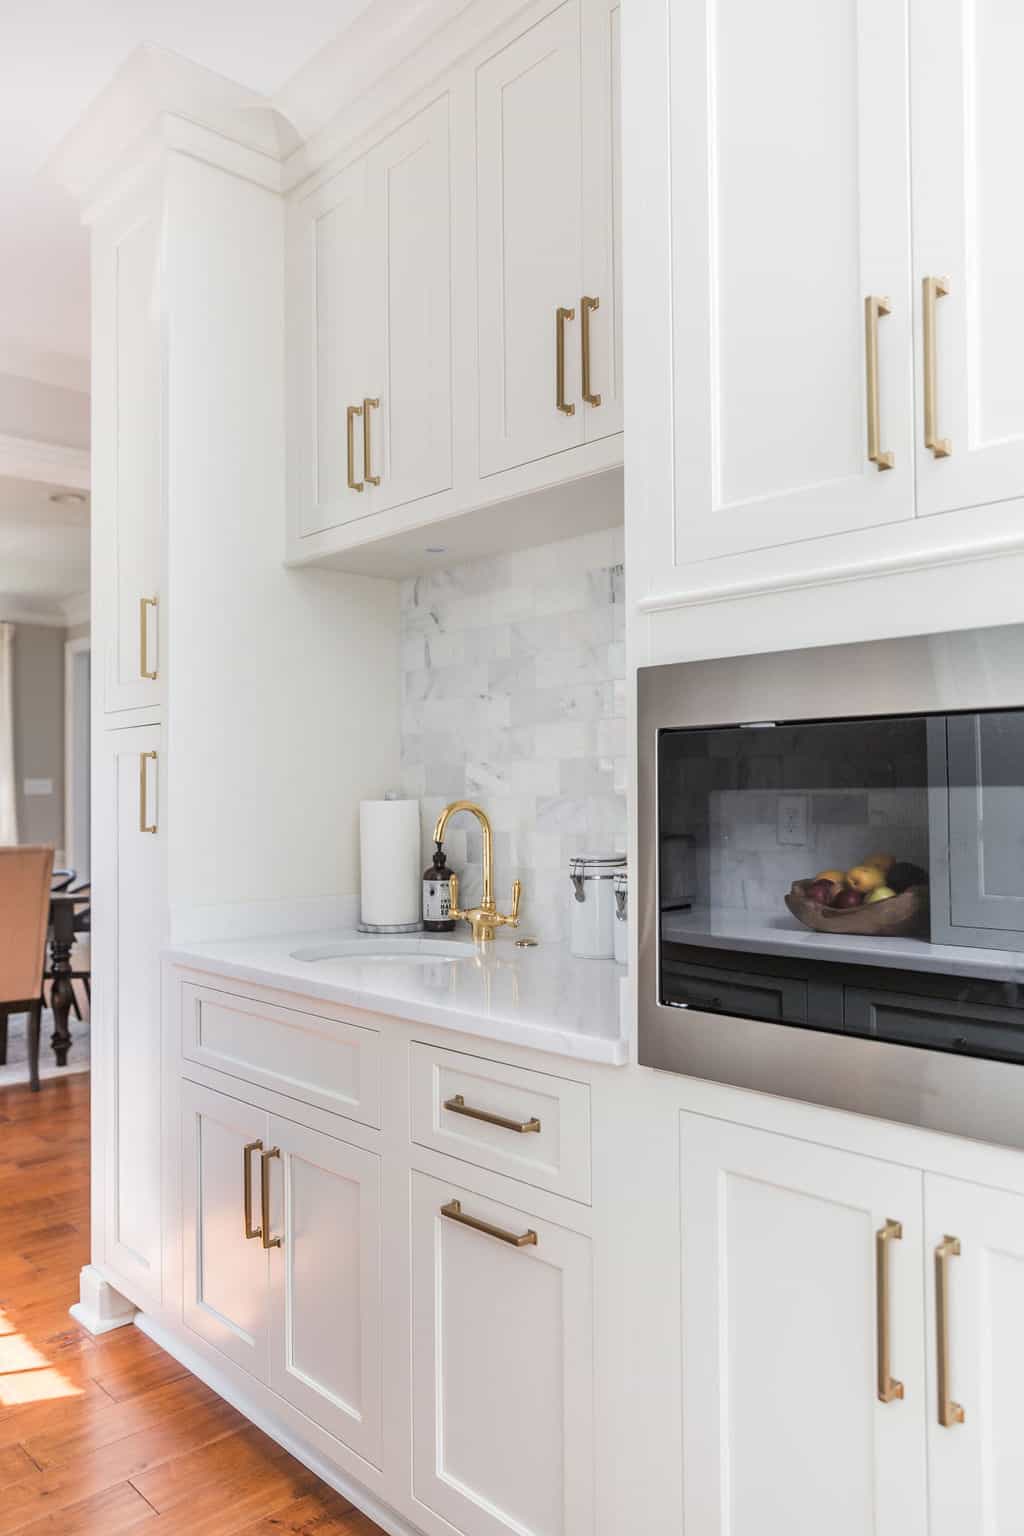 Nicholas Design Build | A remodeled kitchen with white cabinets and a microwave.